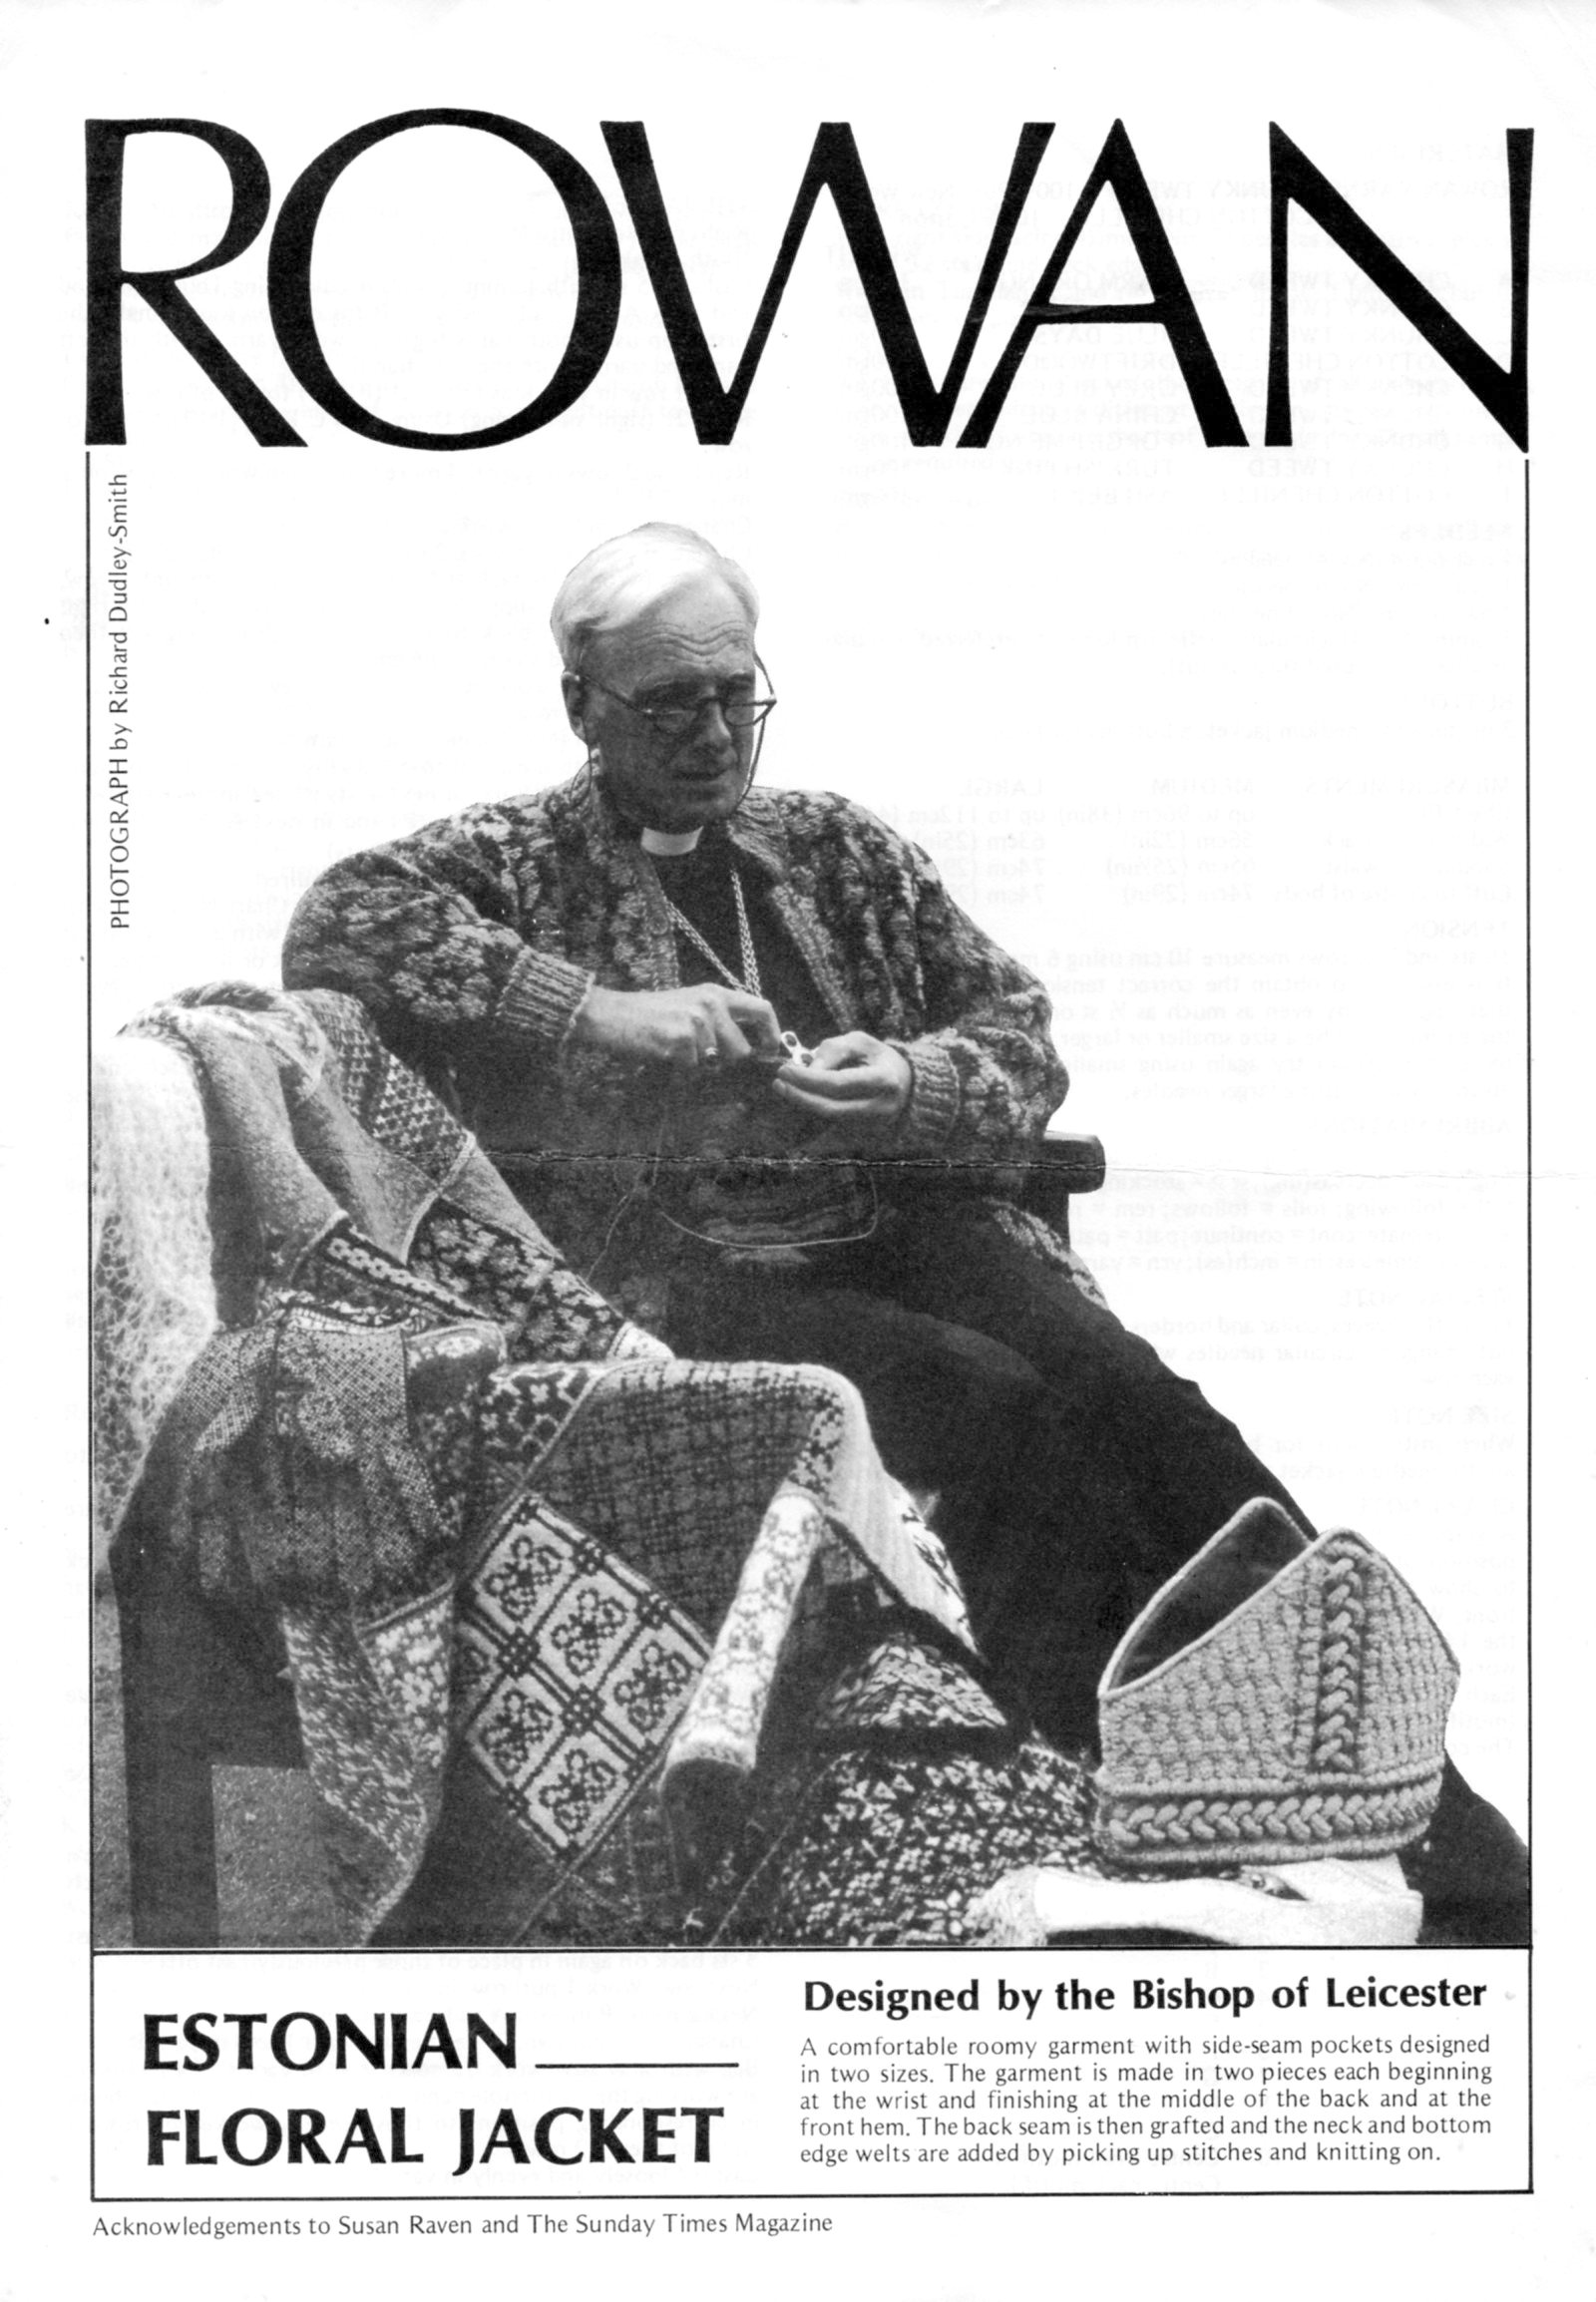 Cover of Rowan Estonial Floral Jacket leaflet. Bishop of Leicester sitting on a chair wearing the jacket. THere is a colour motif blanked and a pair of gloves on the seat beside him and a mitre near his legs.